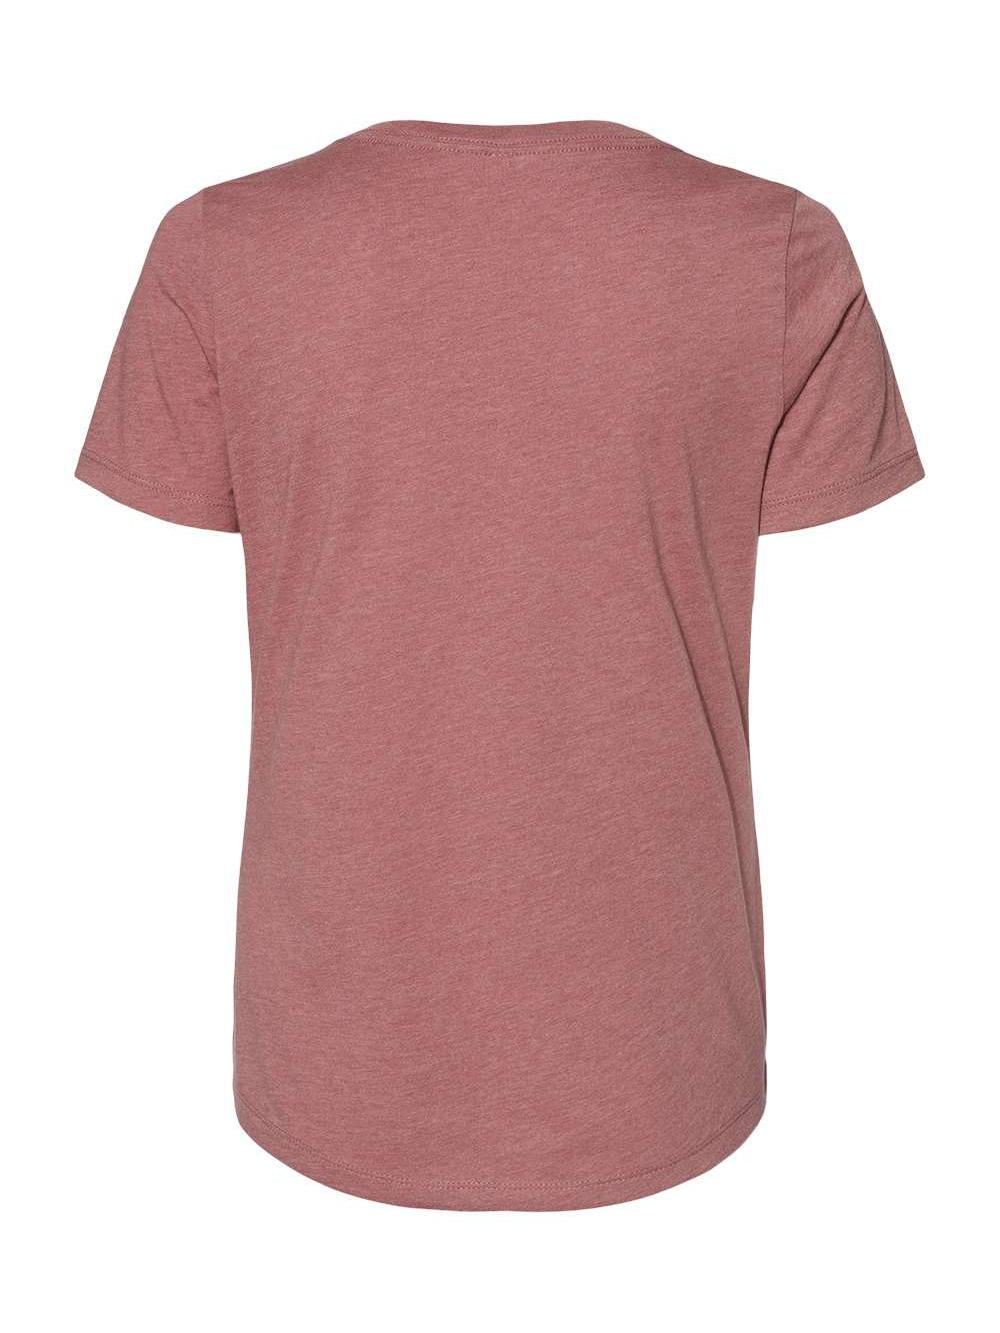 Ladies' Relaxed Jersey V-Neck T-Shirt HEATHER MAUVE M